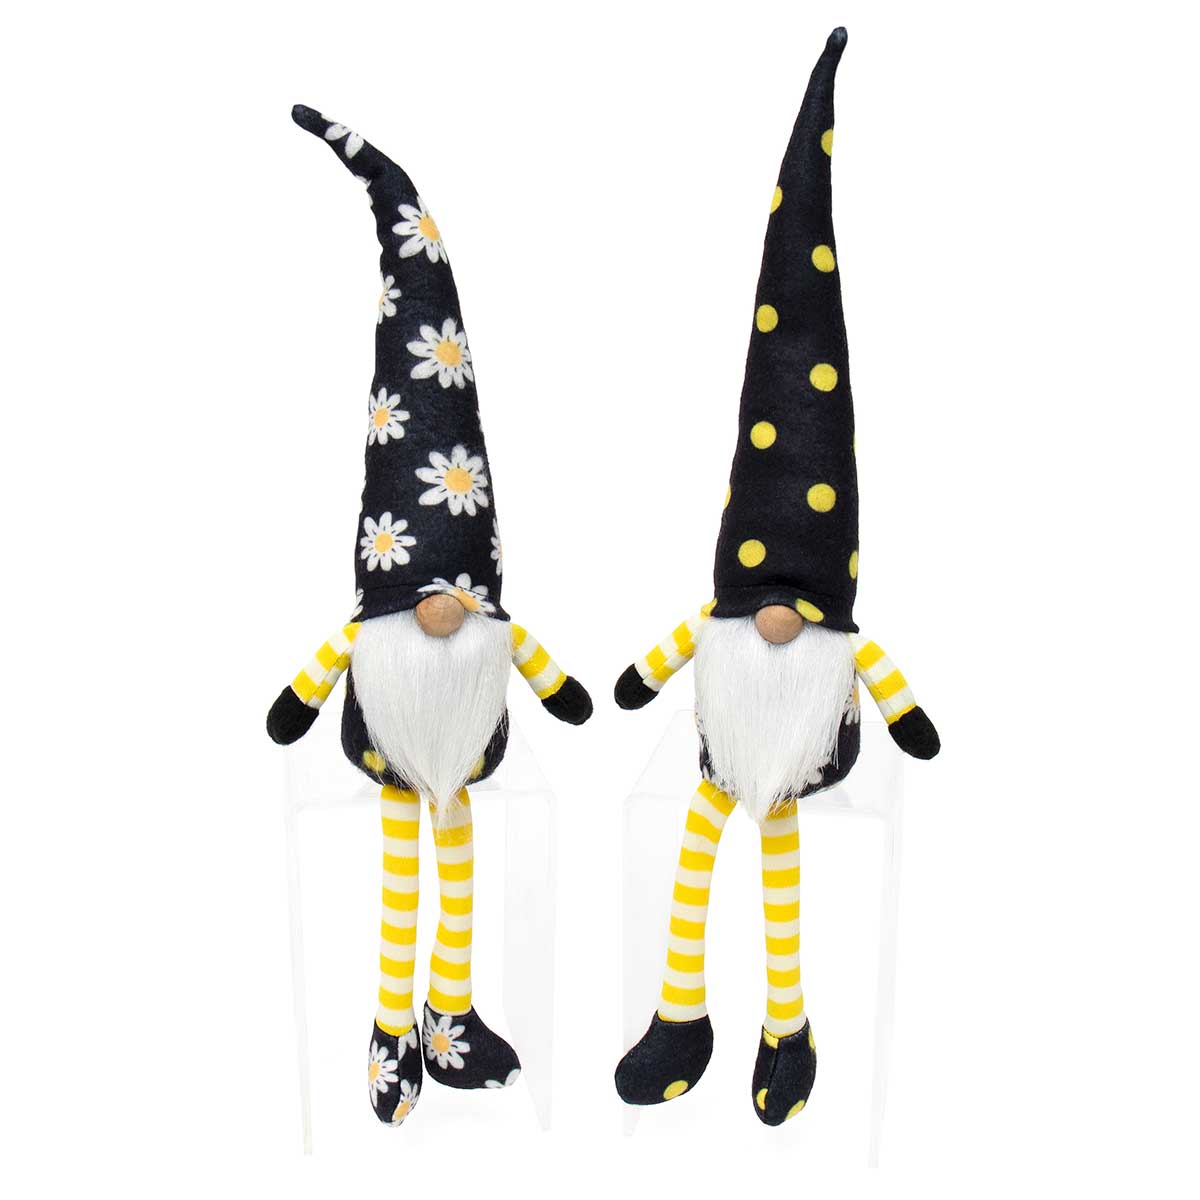 b50 Maisy and Daisy Gnome with Legs, Arms 16"